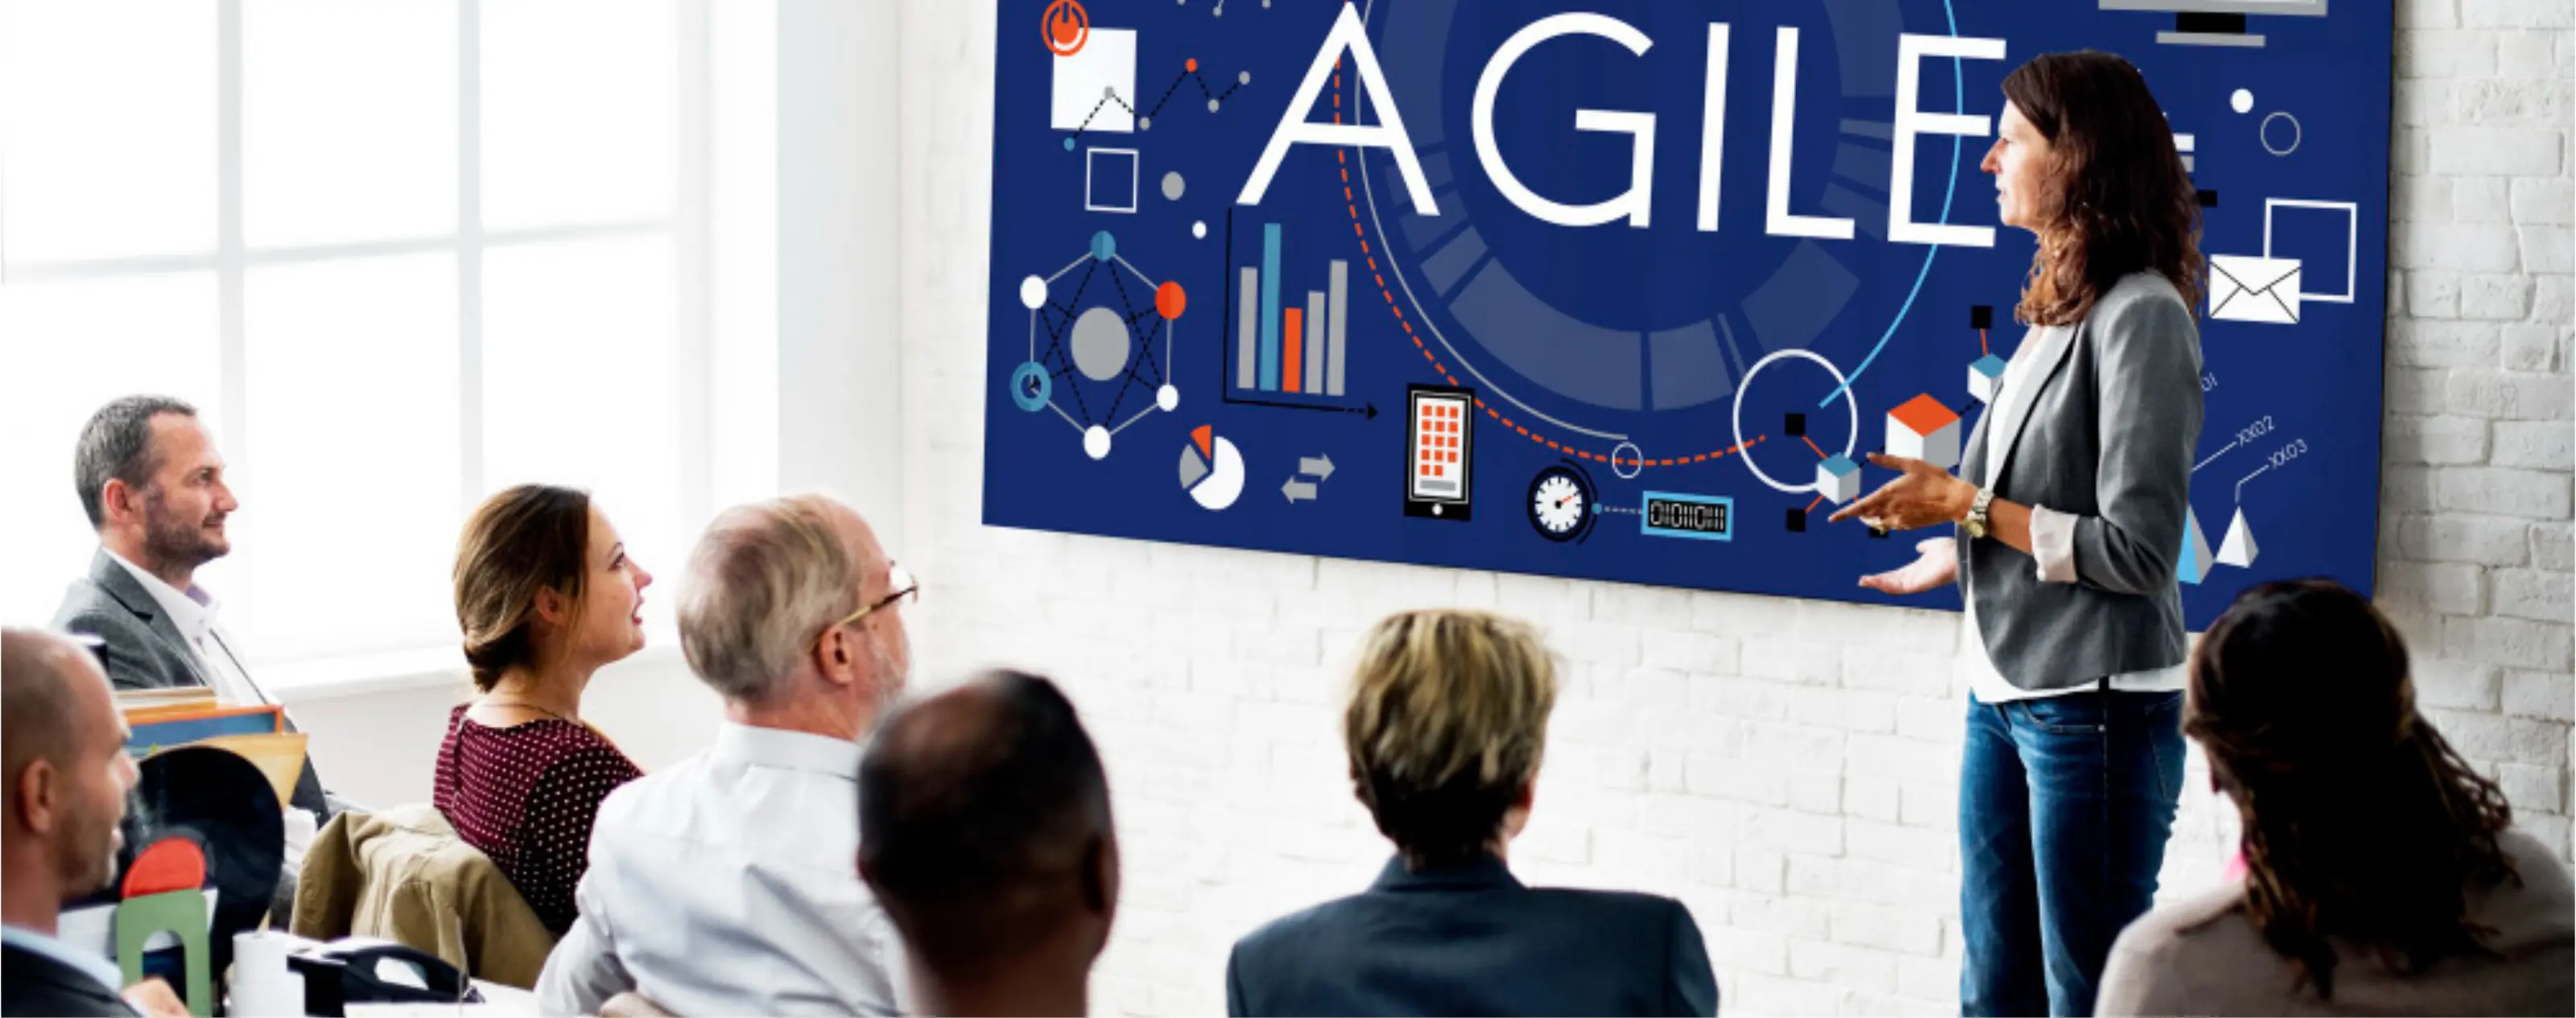 Agile Values: Individuals, Interactions, and Customer Collaboration